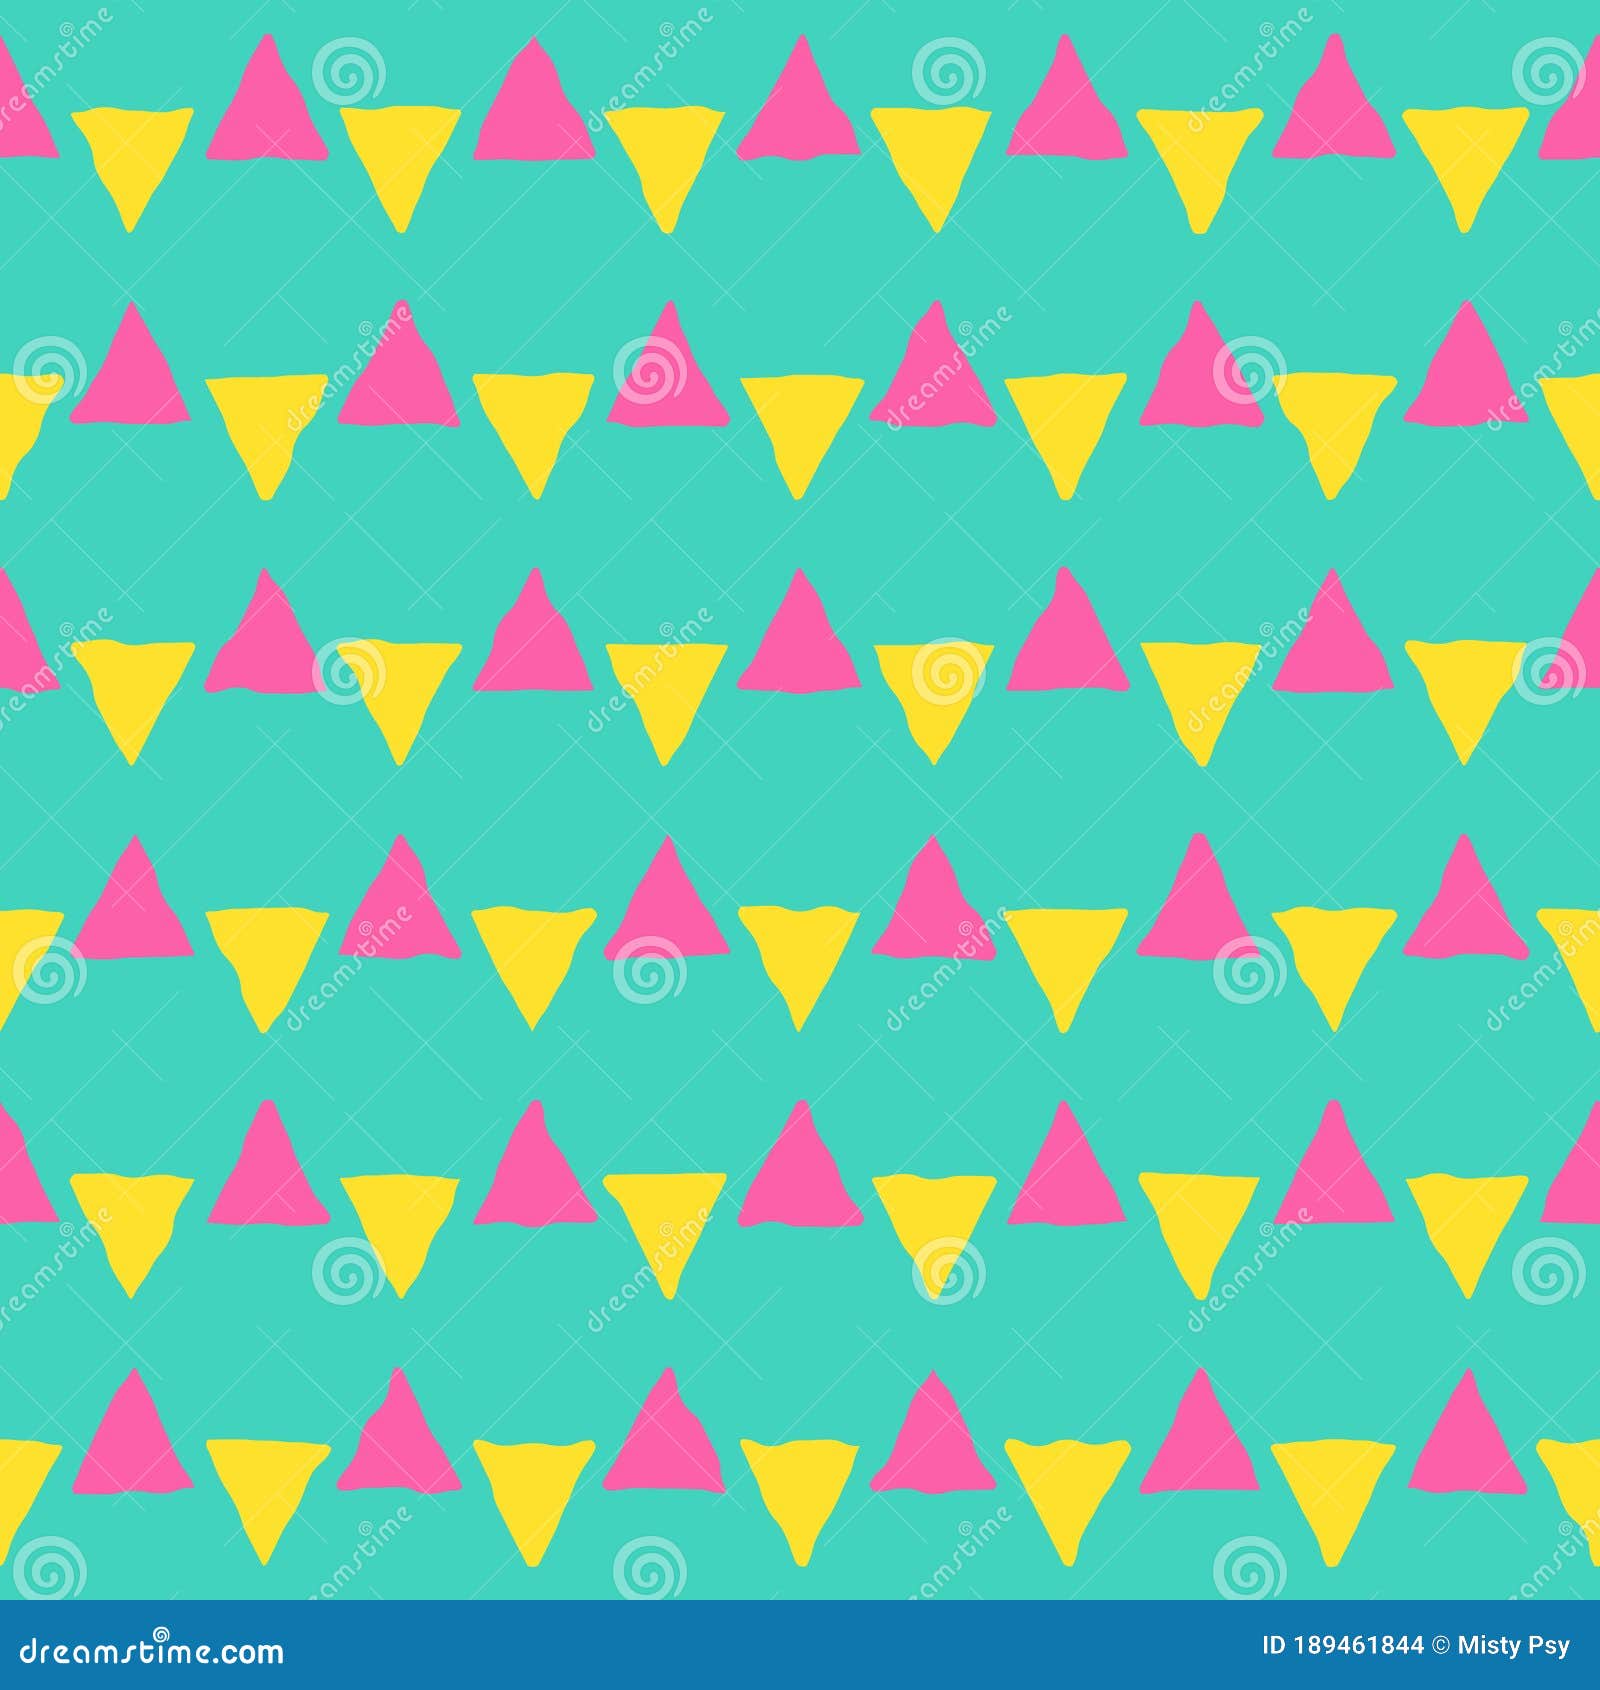  Seamless Retro 80s or 90s Triangles Green Turquoise